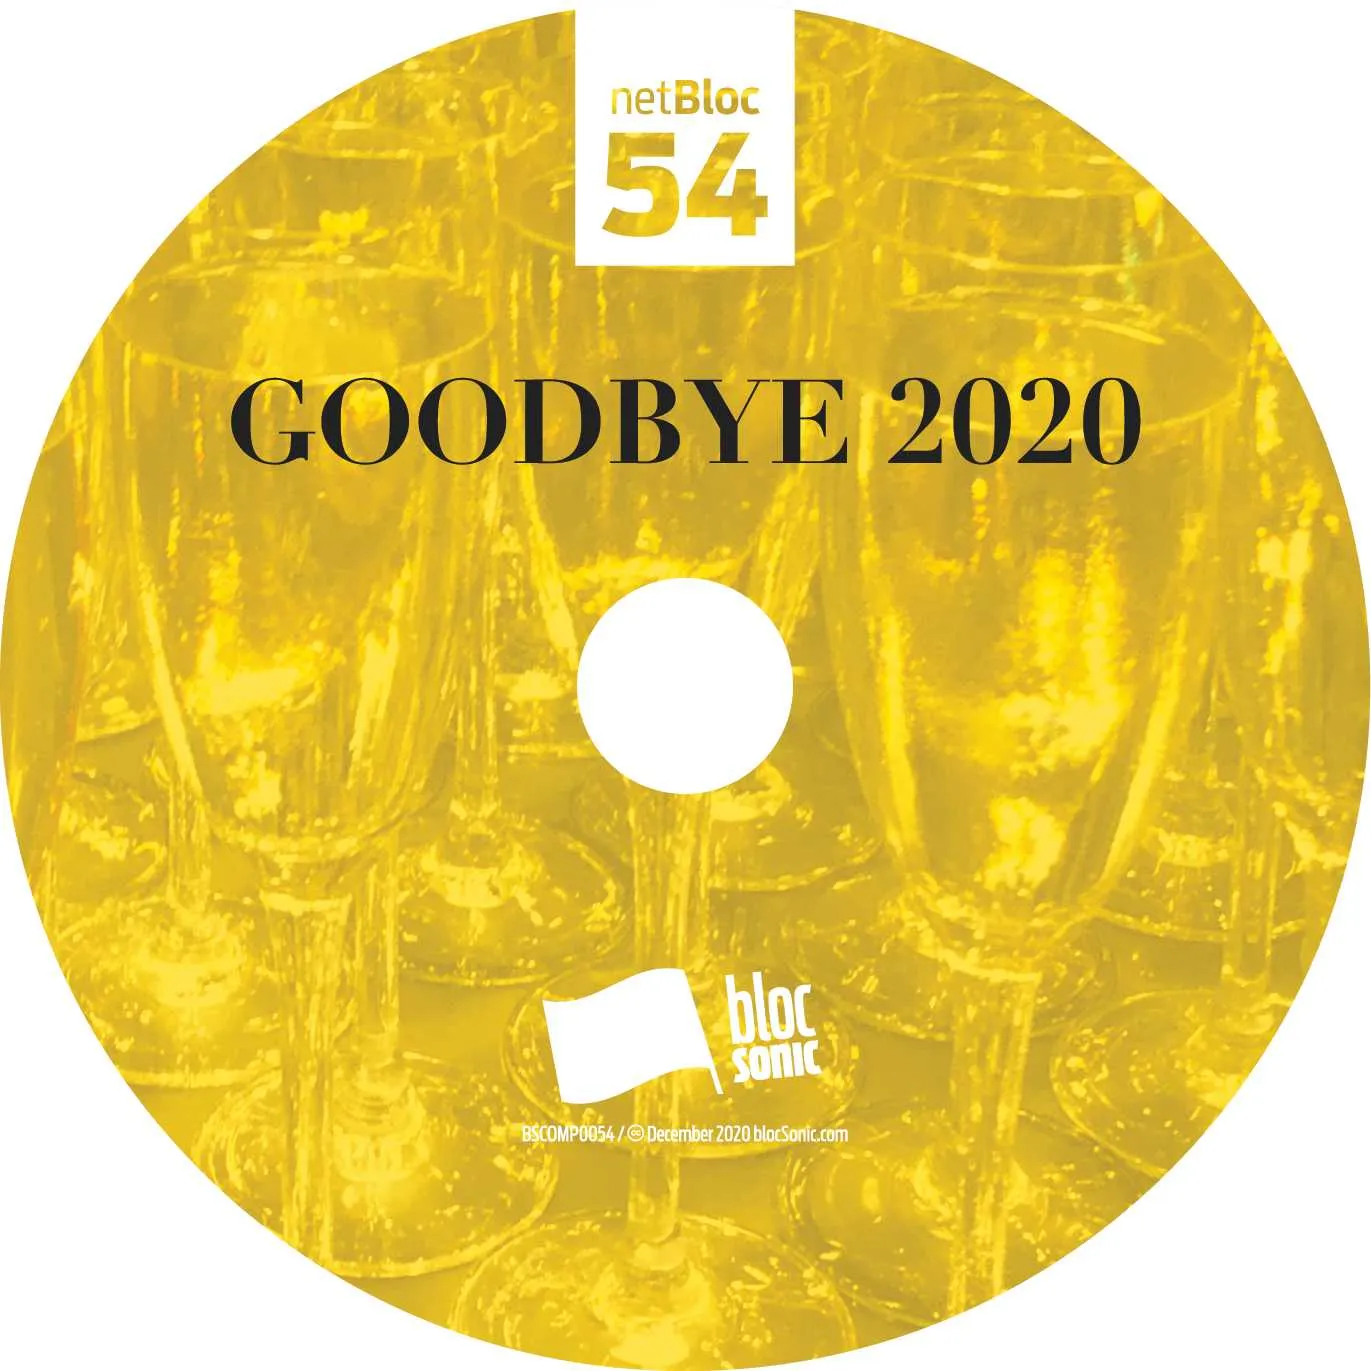 Album disc for “netBloc Vol. 54: Goodbye 2020” by Various Artists